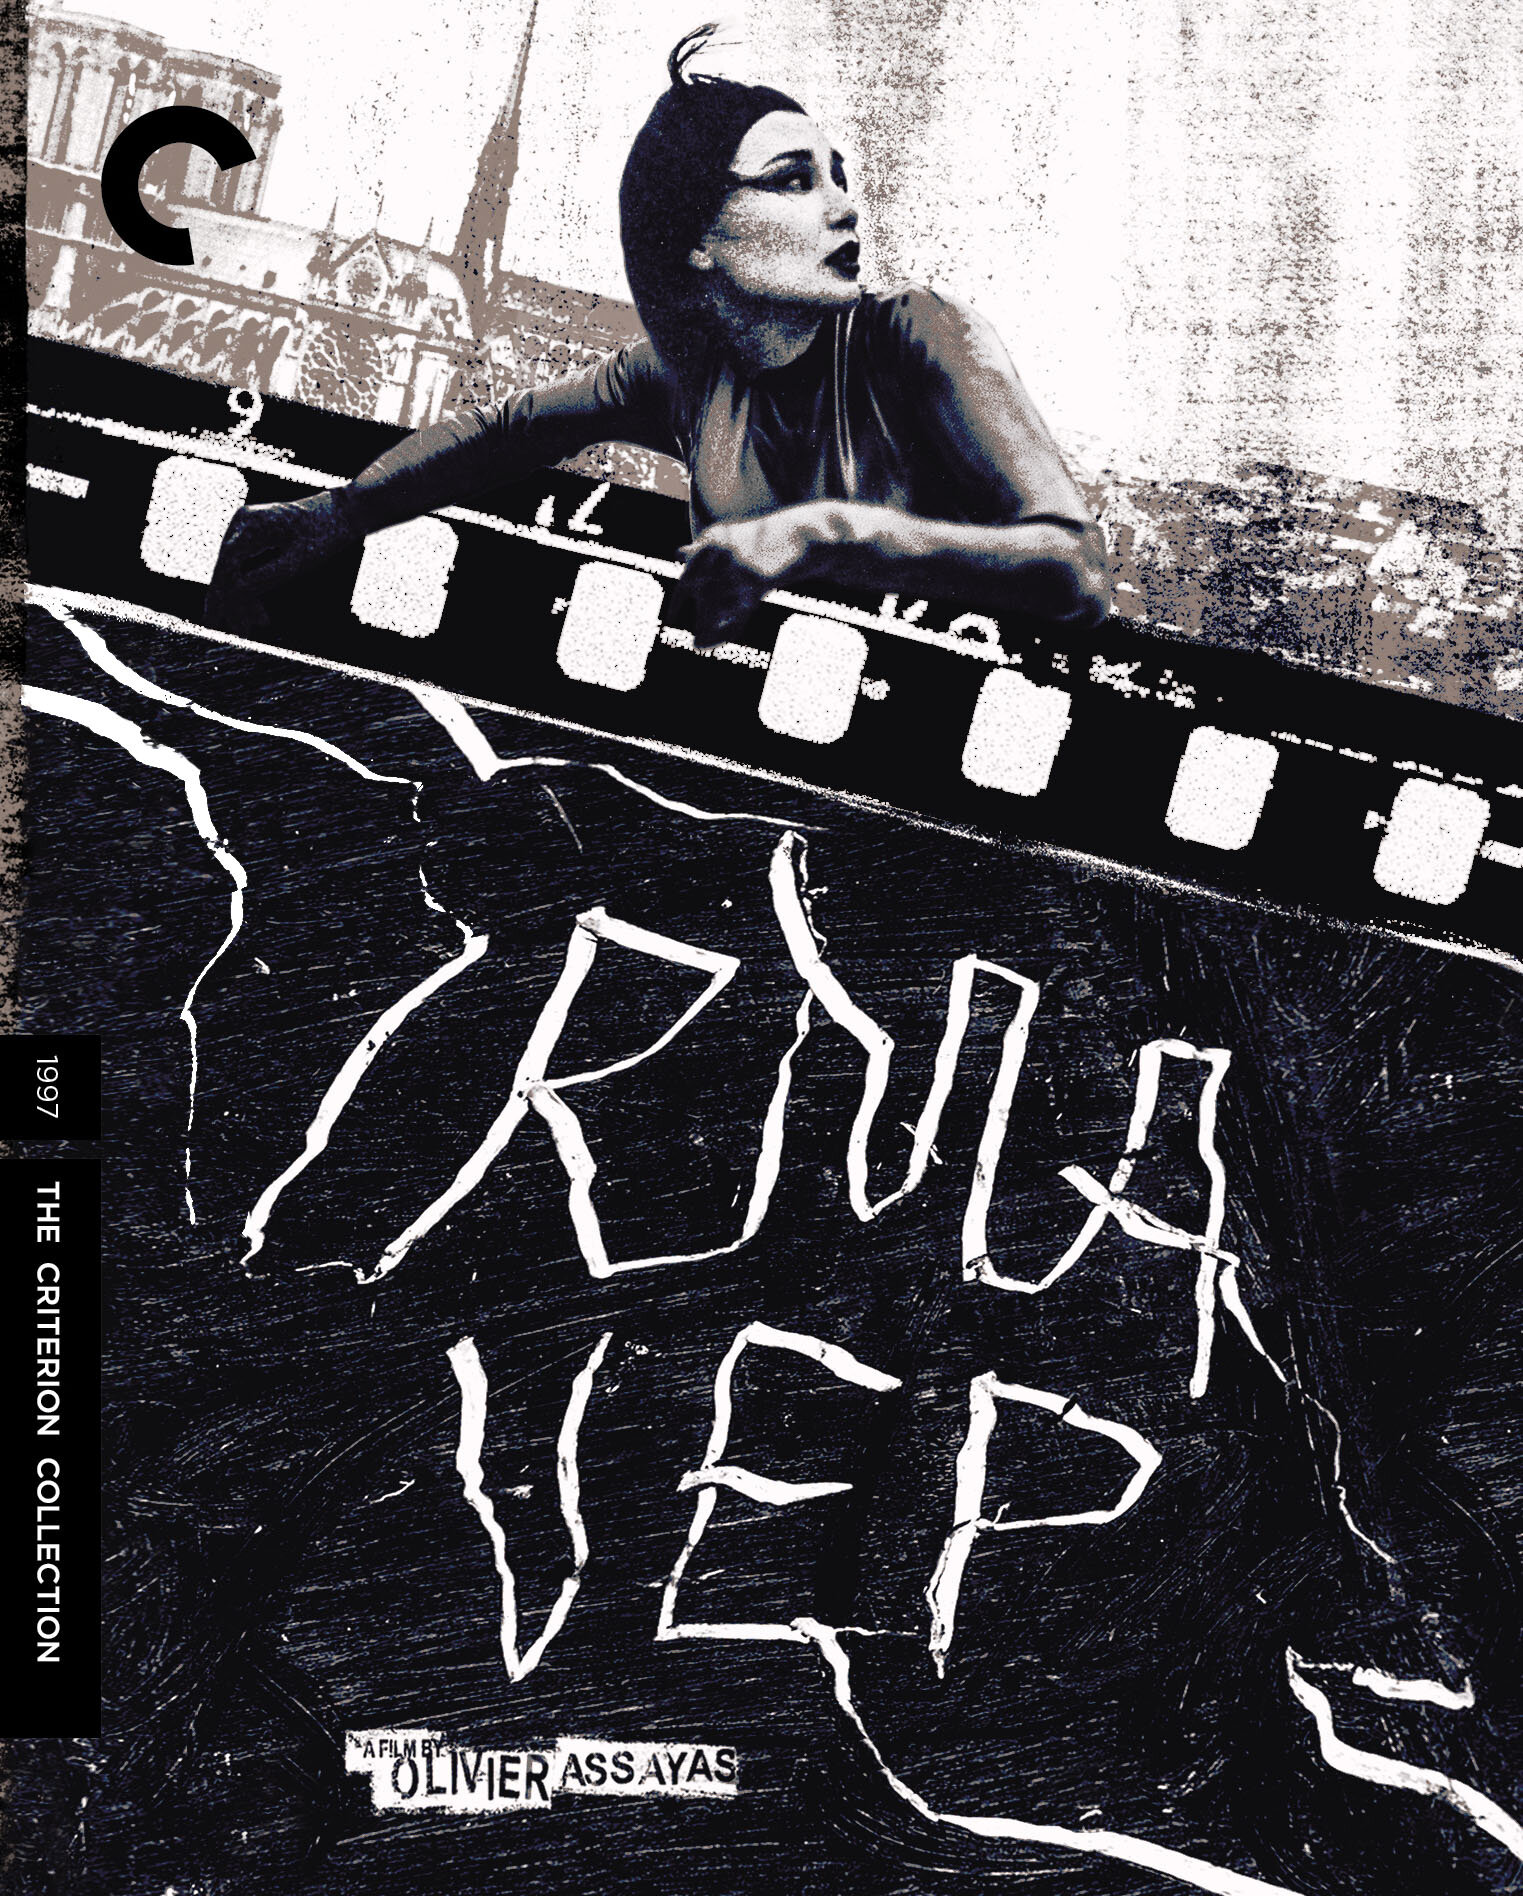 The Criterion Collection: Irma Vep